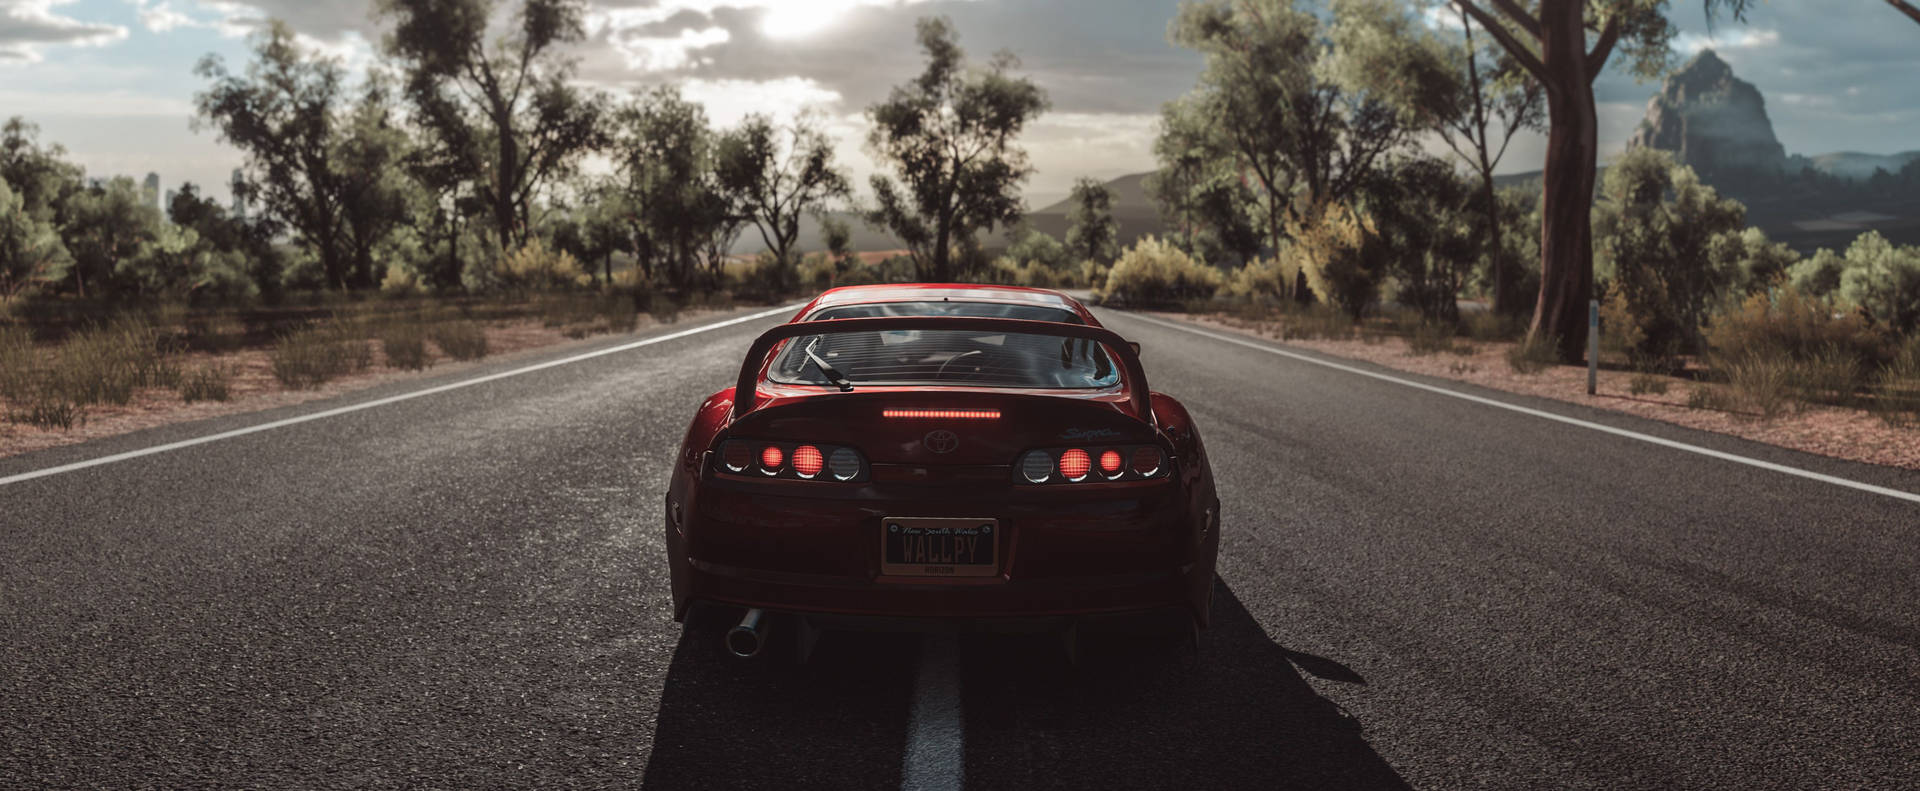 Parked Red Toyota Supra At Road Background